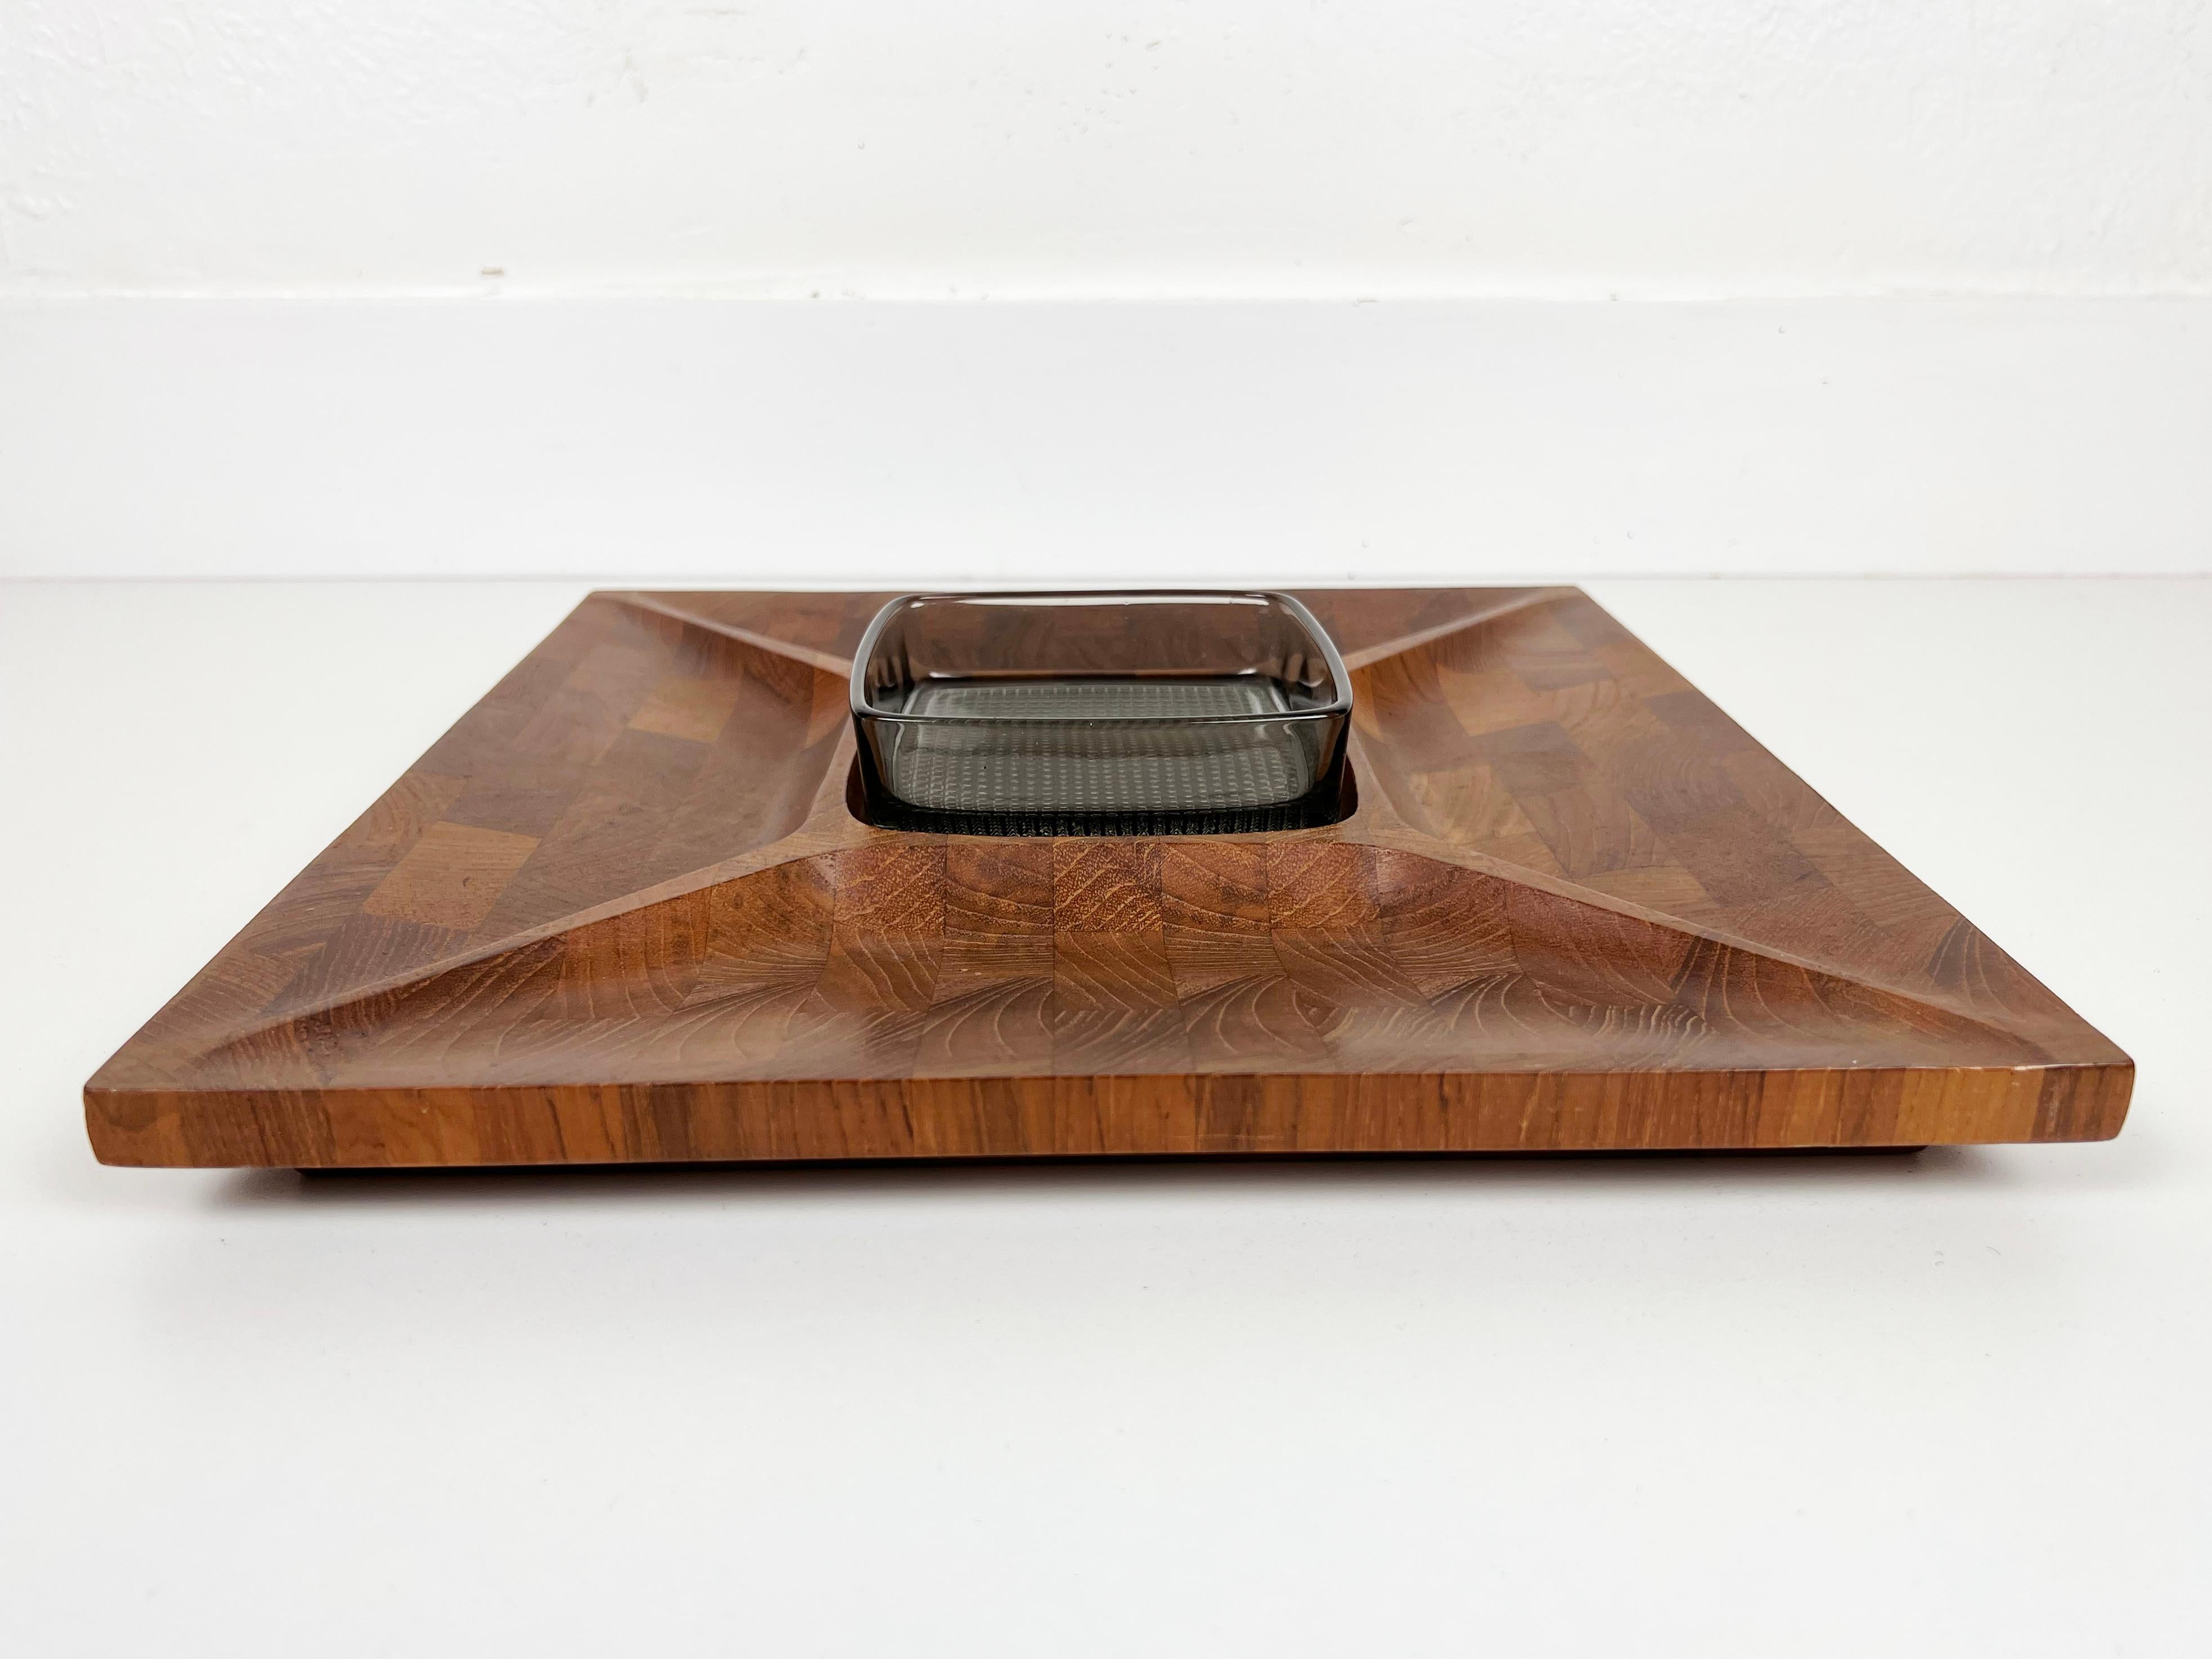 Vintage Divided Teak Serving Tray with Glass Dish by Digsmed For Sale 2